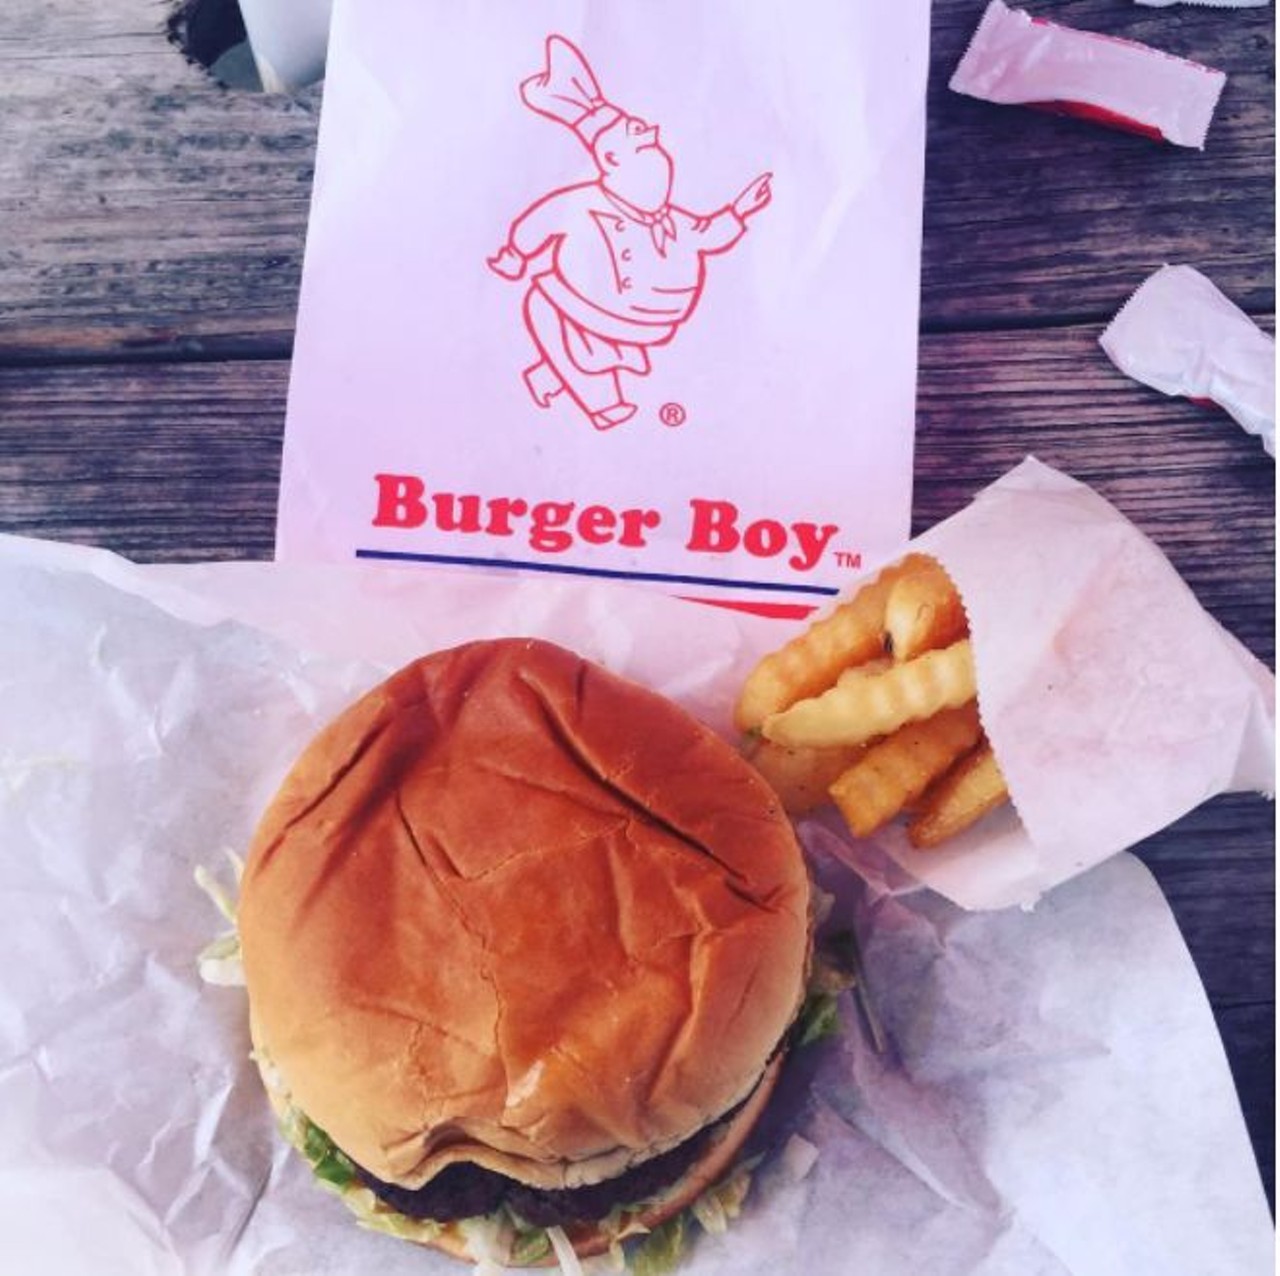 Burger Boy
2323 N St. Mary&#146;s St, (210) 735-1955
Burger Boy serves up banging burgers on the go, always paired with golden fries for your satisfaction.
Photo via Instagram 
quinto_g
